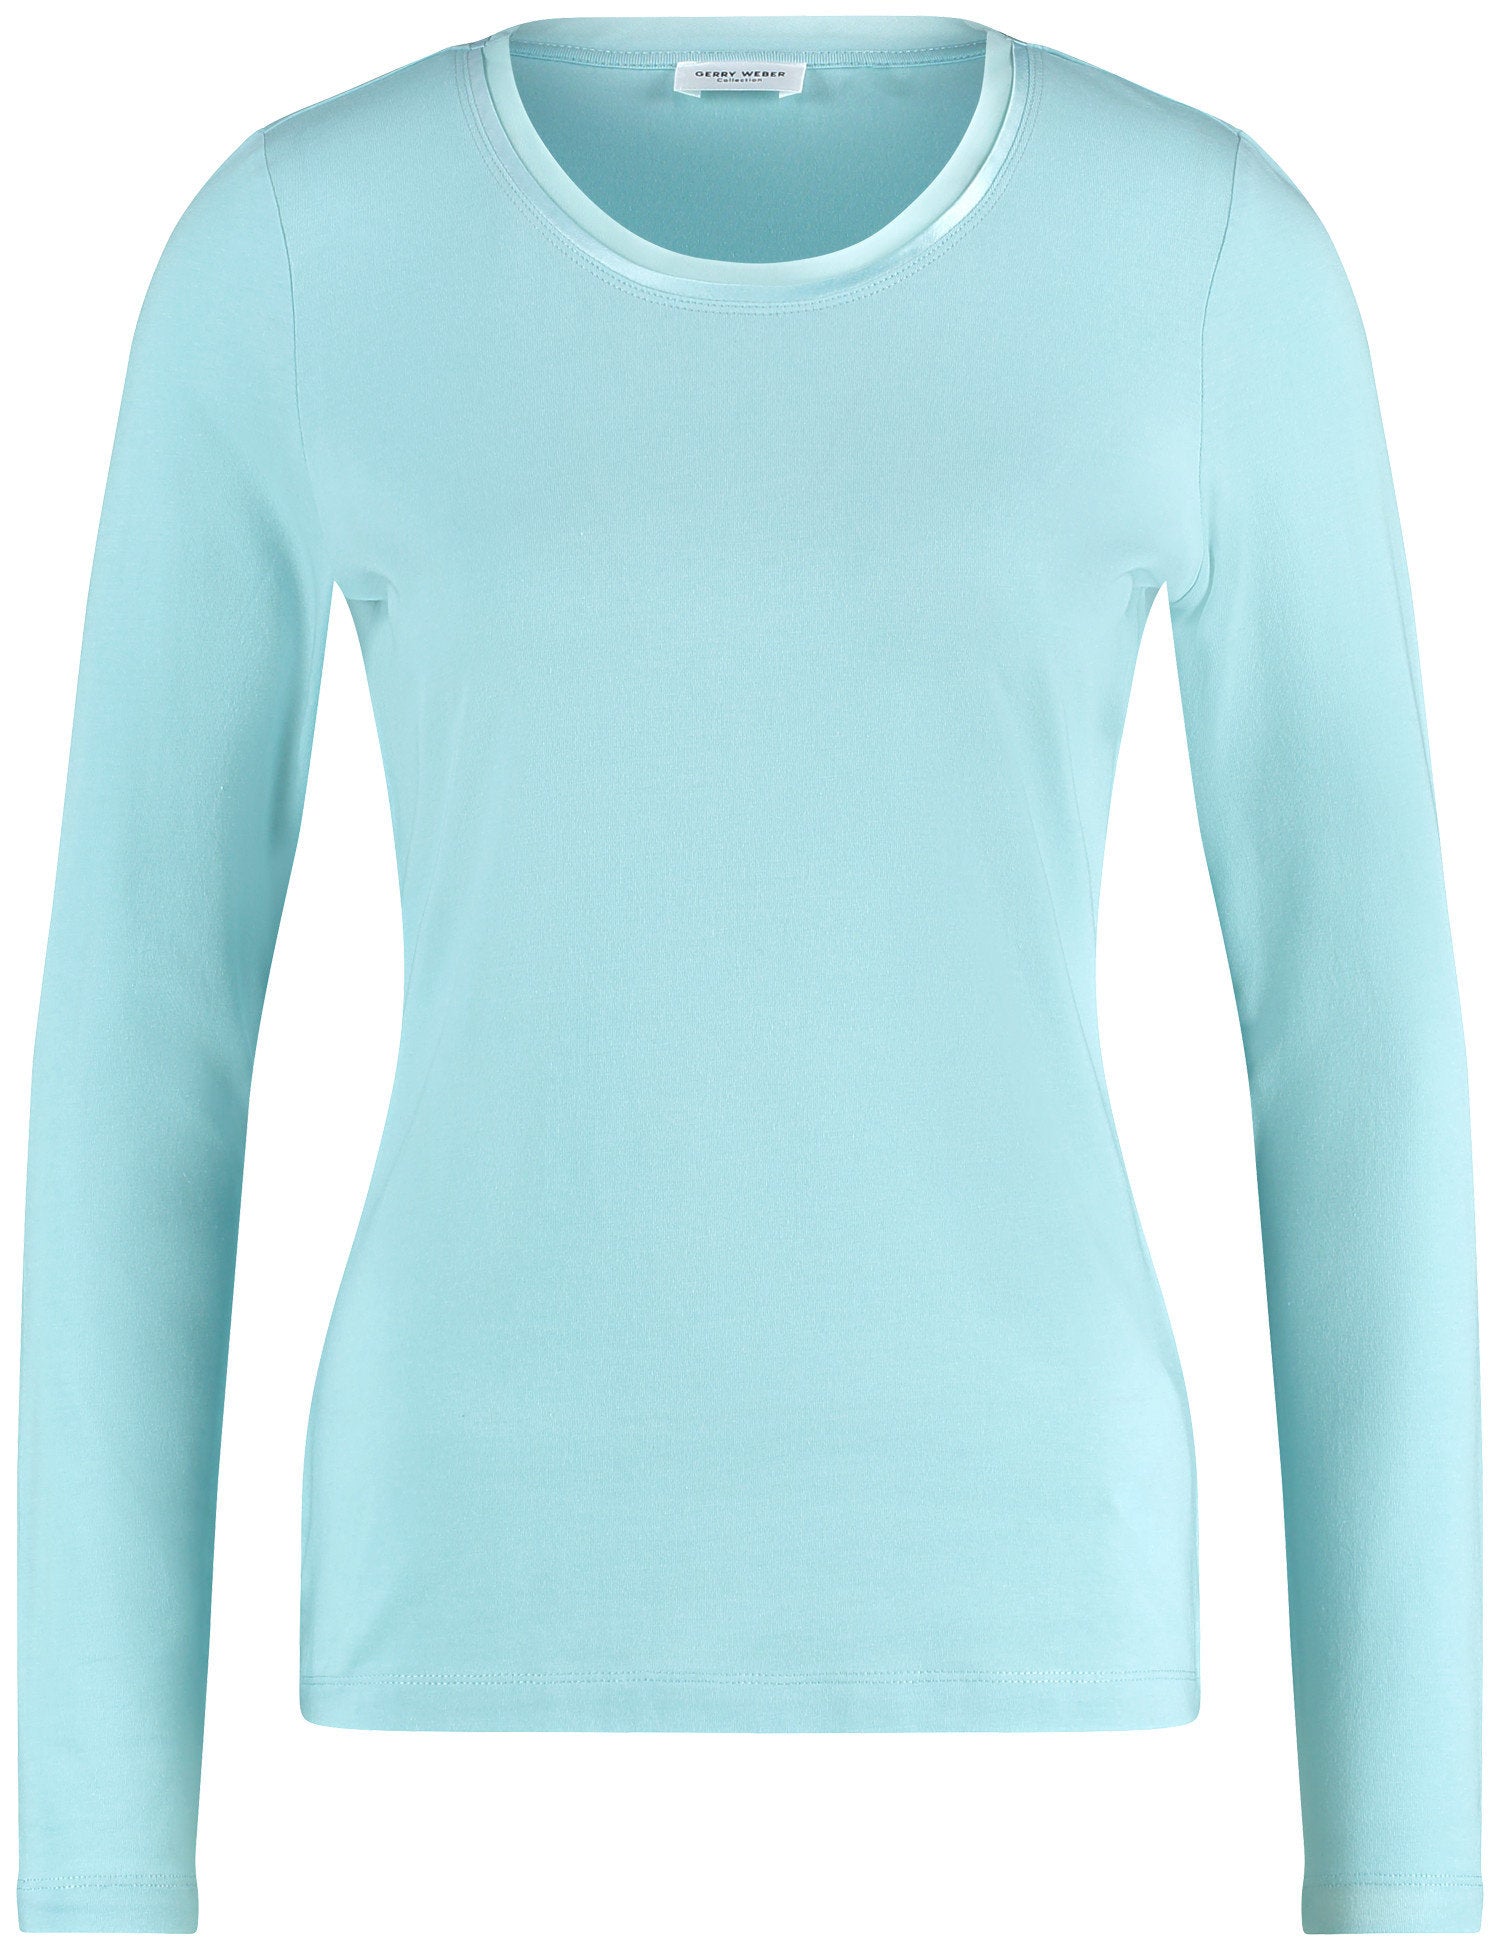 Long Sleeve Top With A Sheer Neckline Trim_370294-35060_80938_02